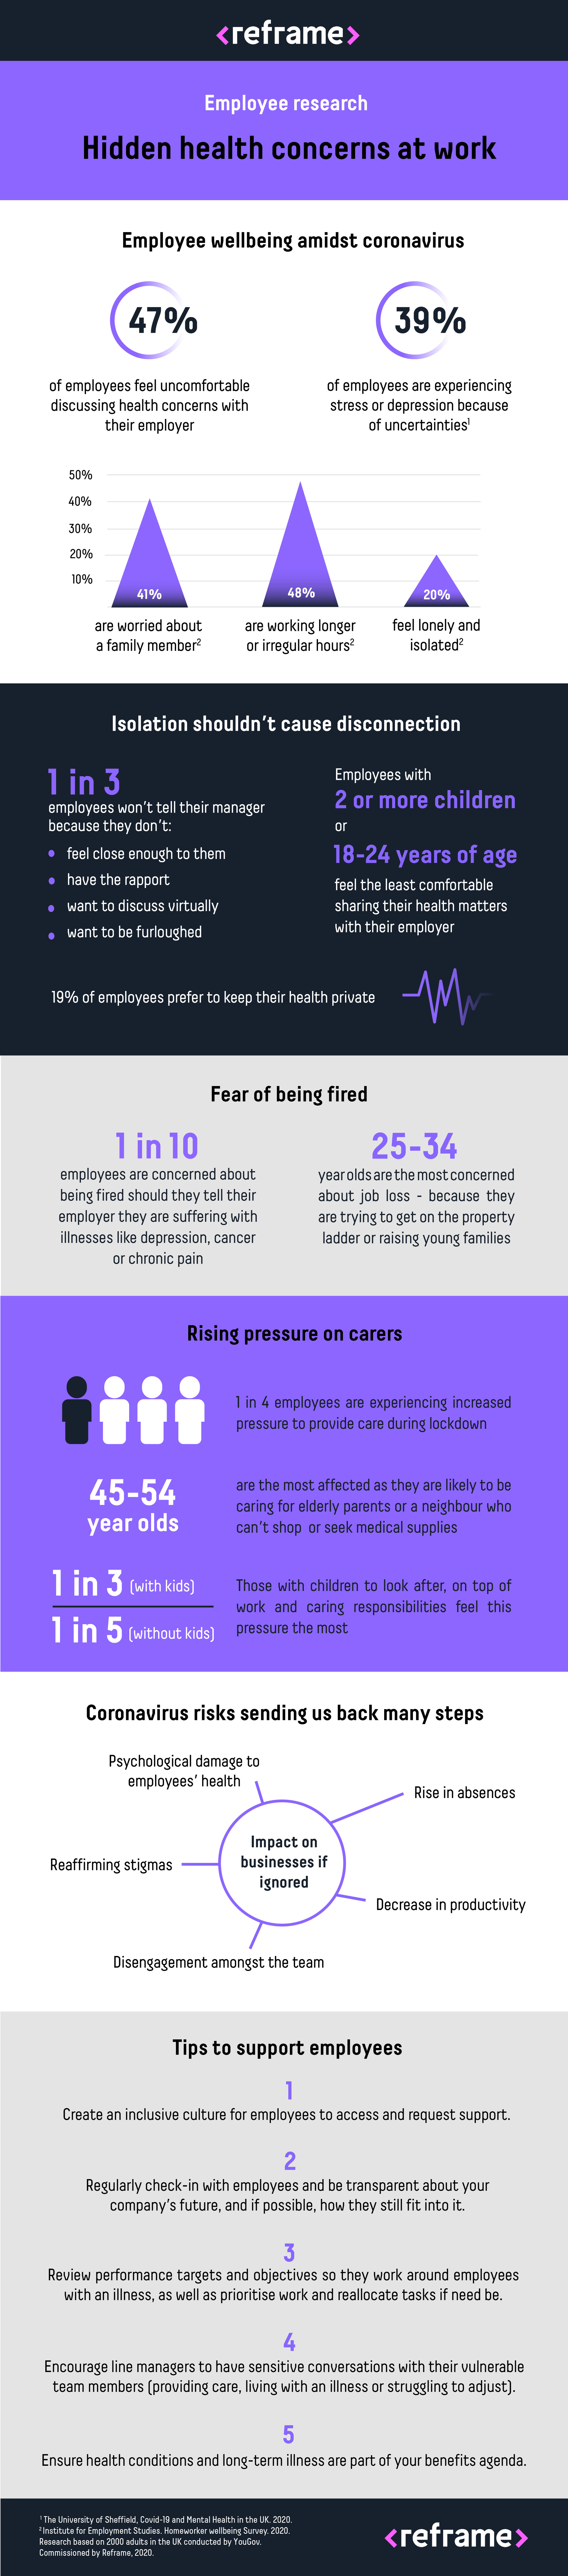 Reframe - Employee health concerns infographic 2020